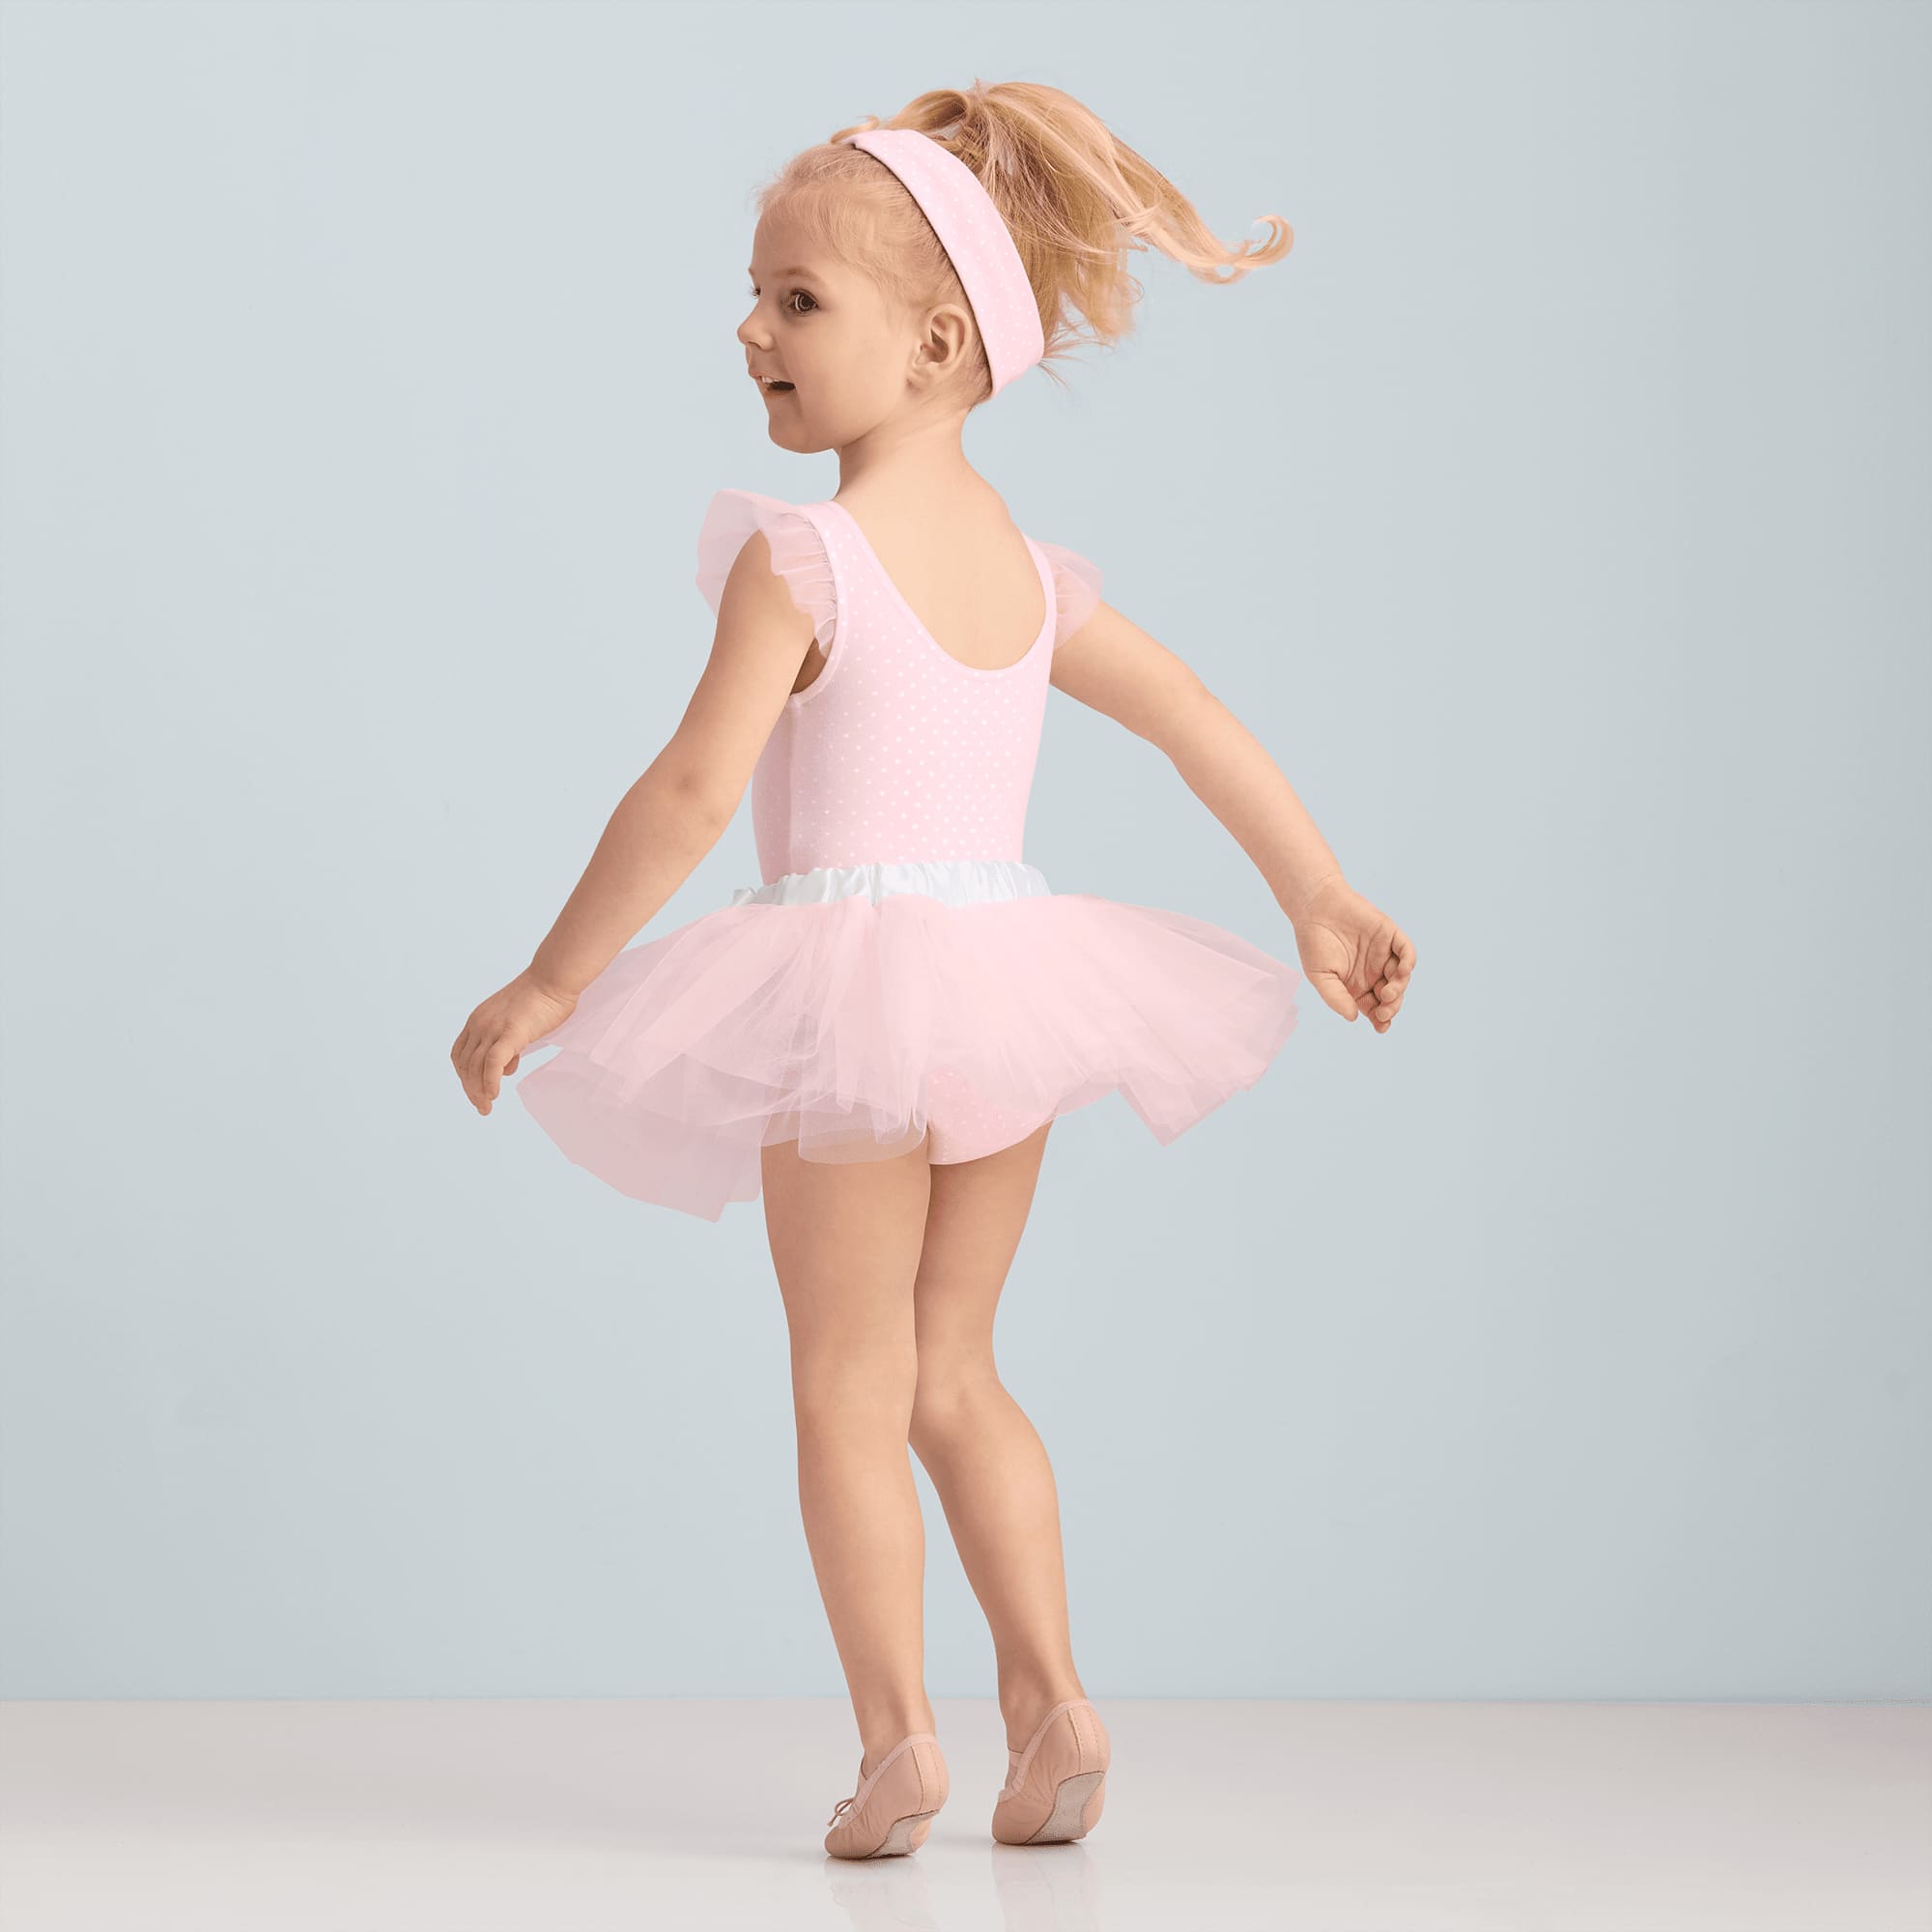 Bitty's™ Ballerina Outfit for Little Girls